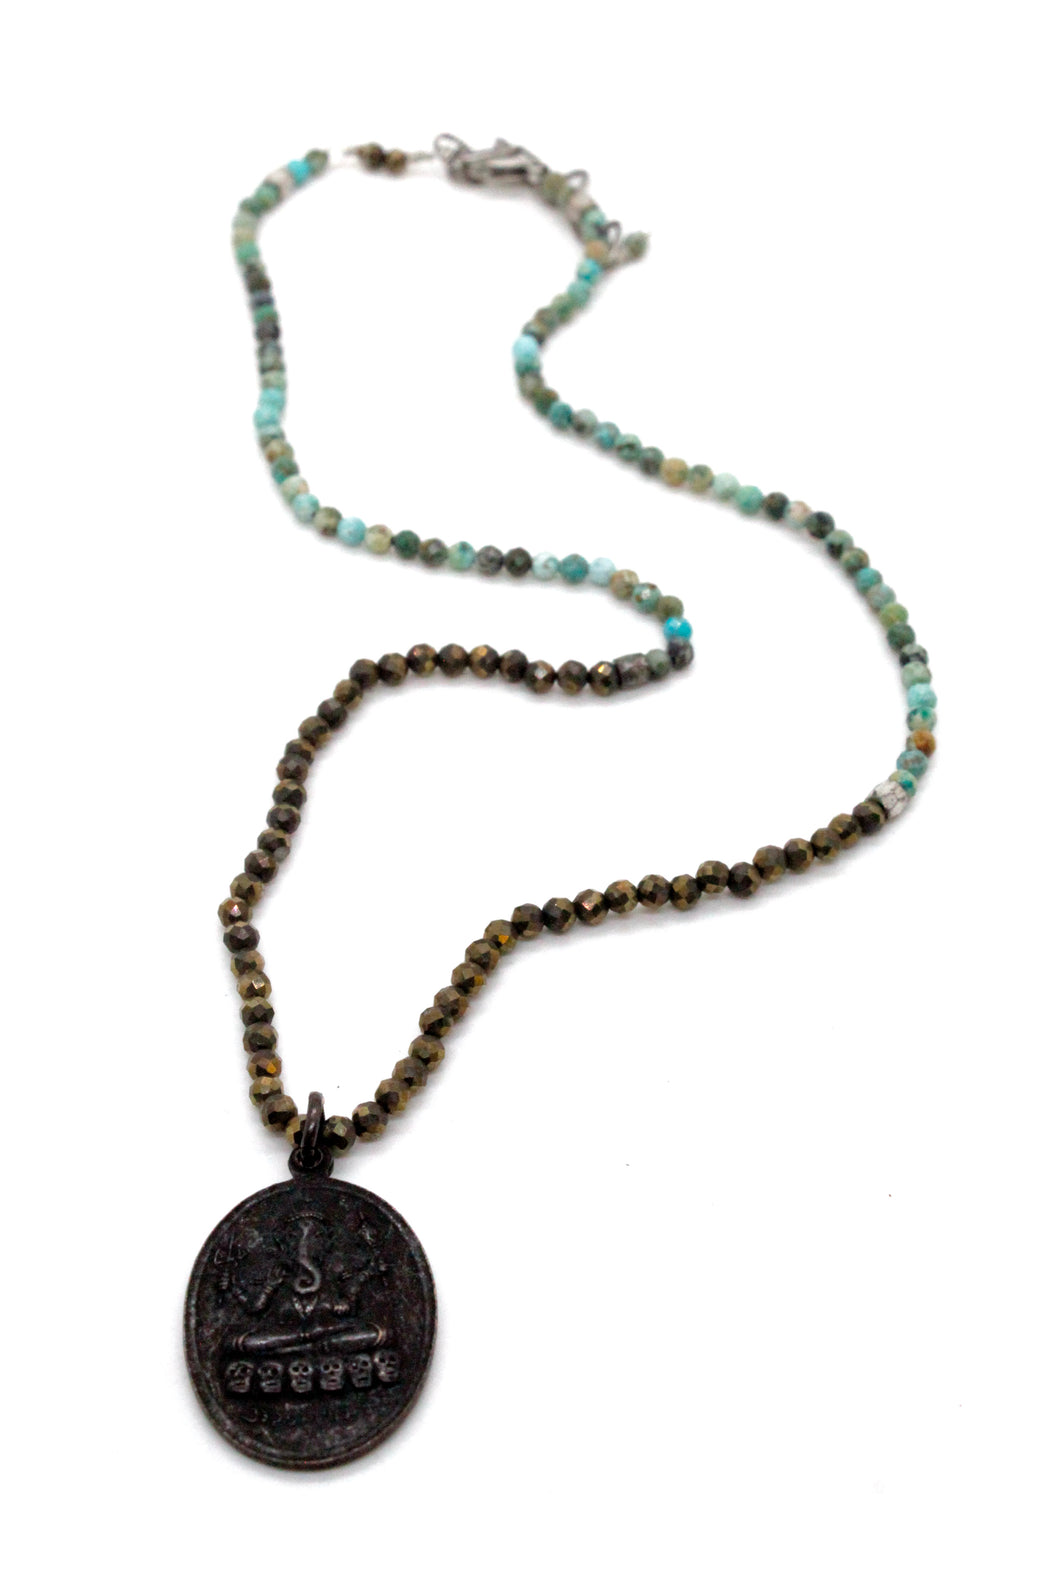 African Turquoise and Pyrite Beaded Necklace with Ganesh Charm NS-AFPY-BkG -The Buddha Collection-